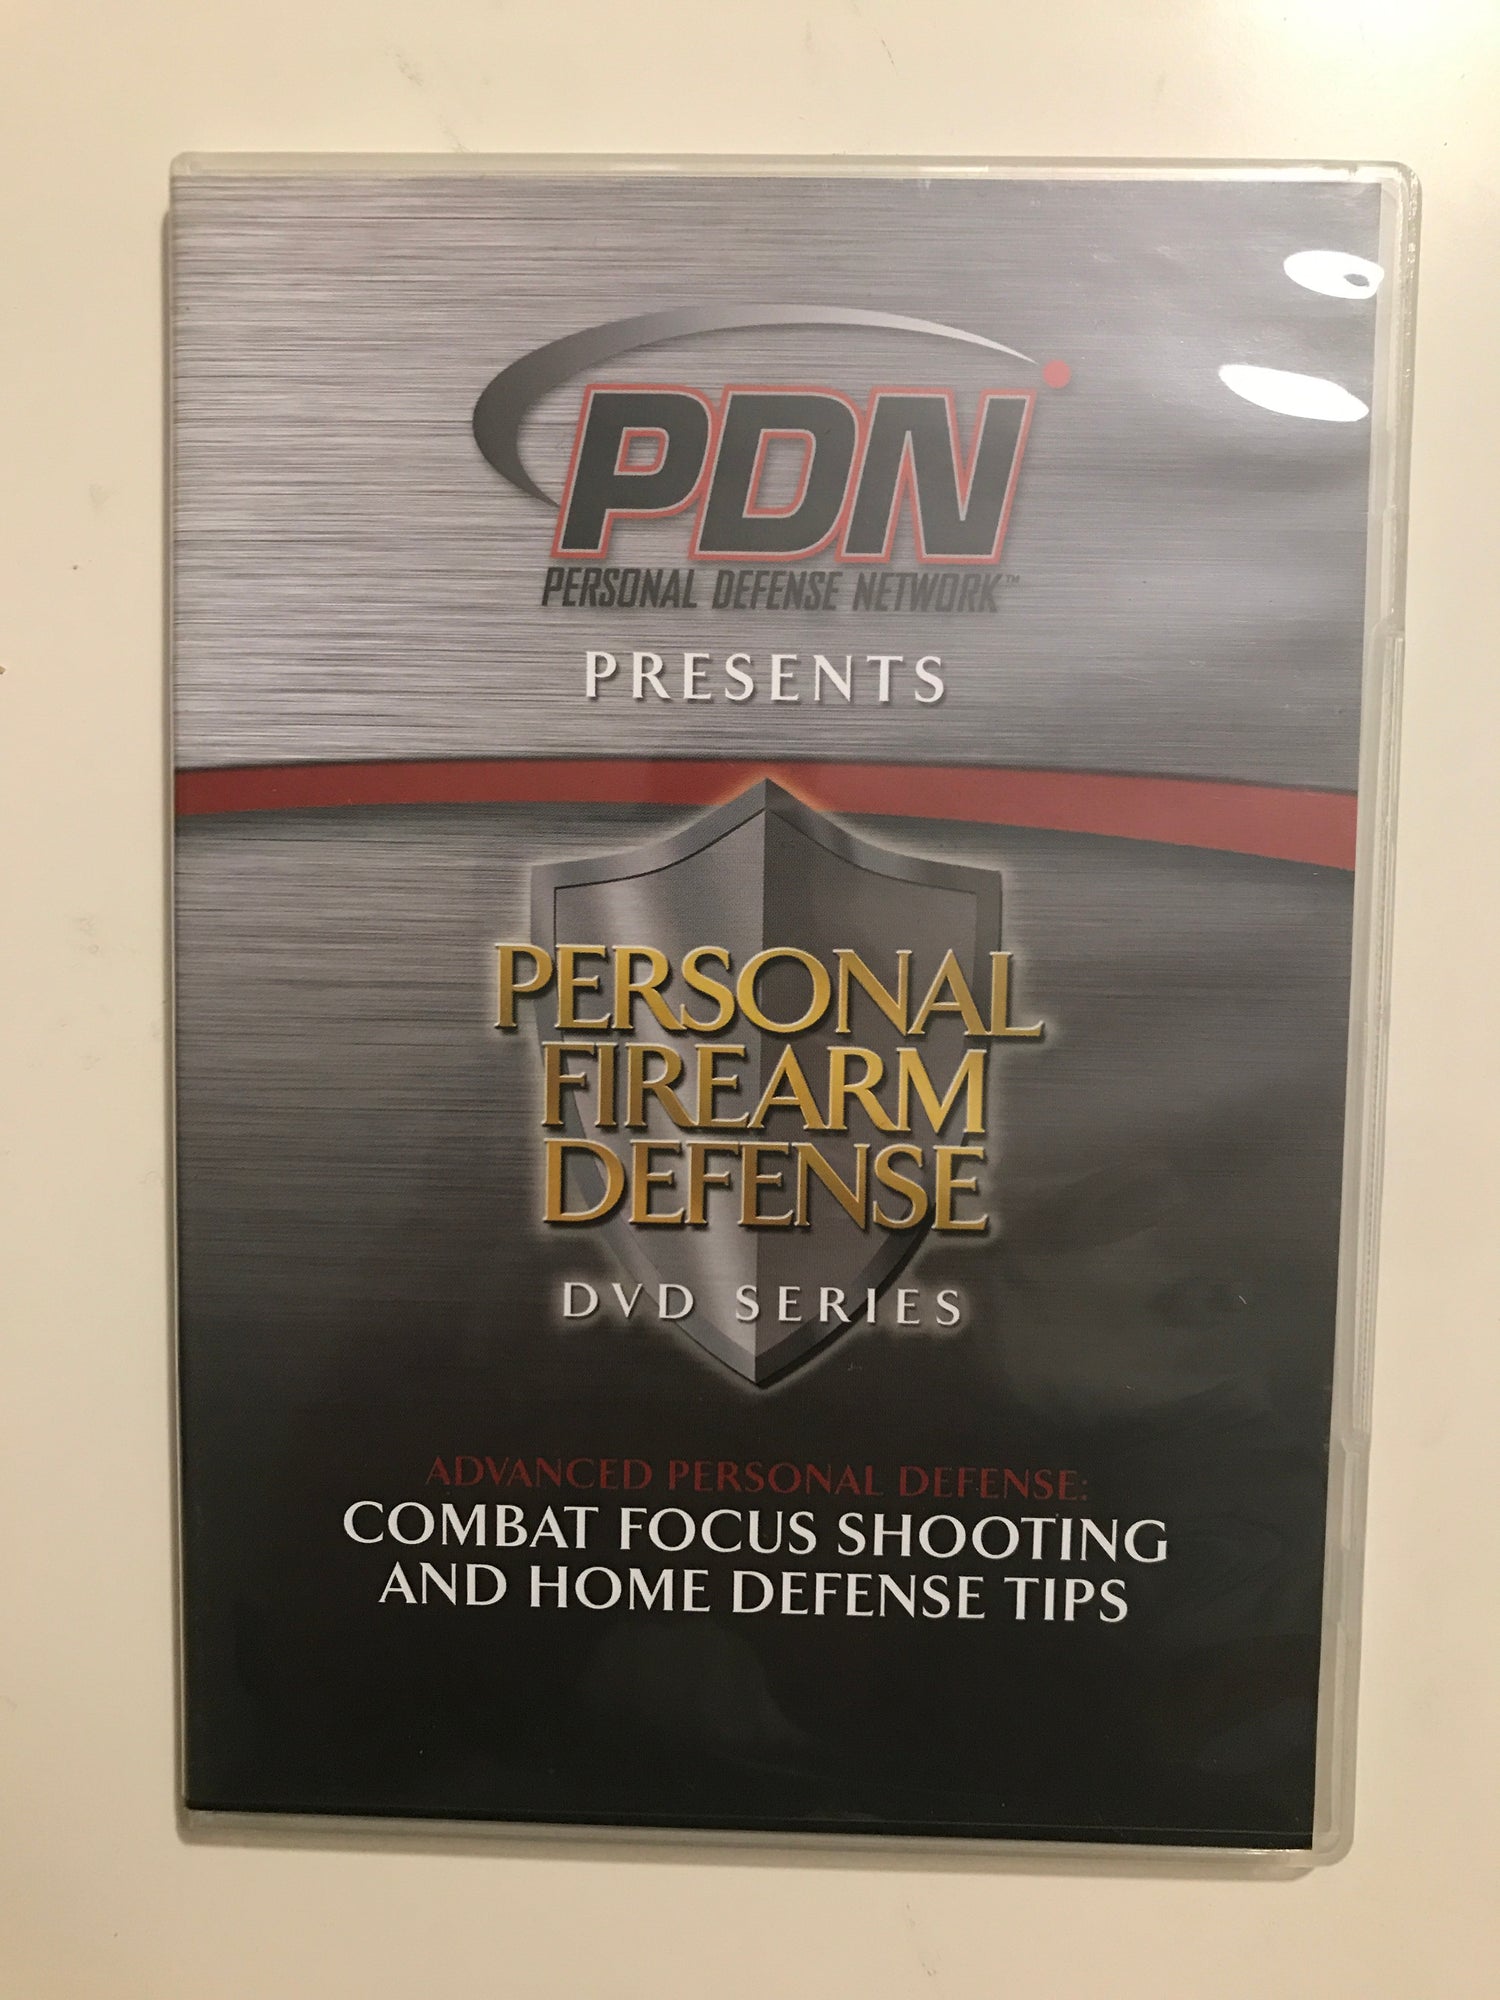 Personal Firearm Defense: Combat Focus Shooting & Home Defense Tips DVD by Rob Pincus (Preowned) - Budovideos Inc